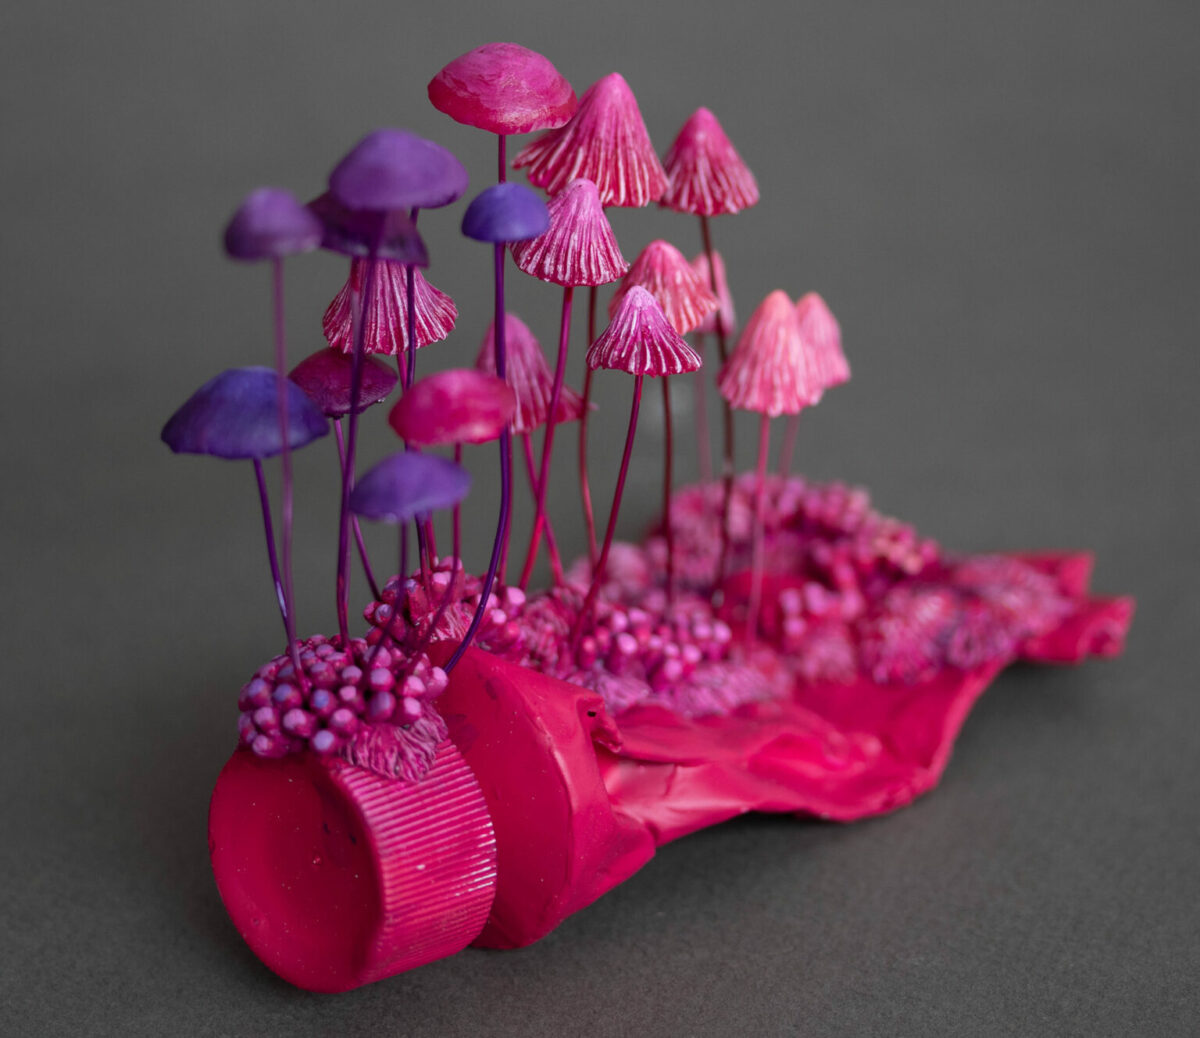 Discarded Objects Populated With Colorful Plant Coral And Fungus Sculptures By Stephanie Kilgast 5